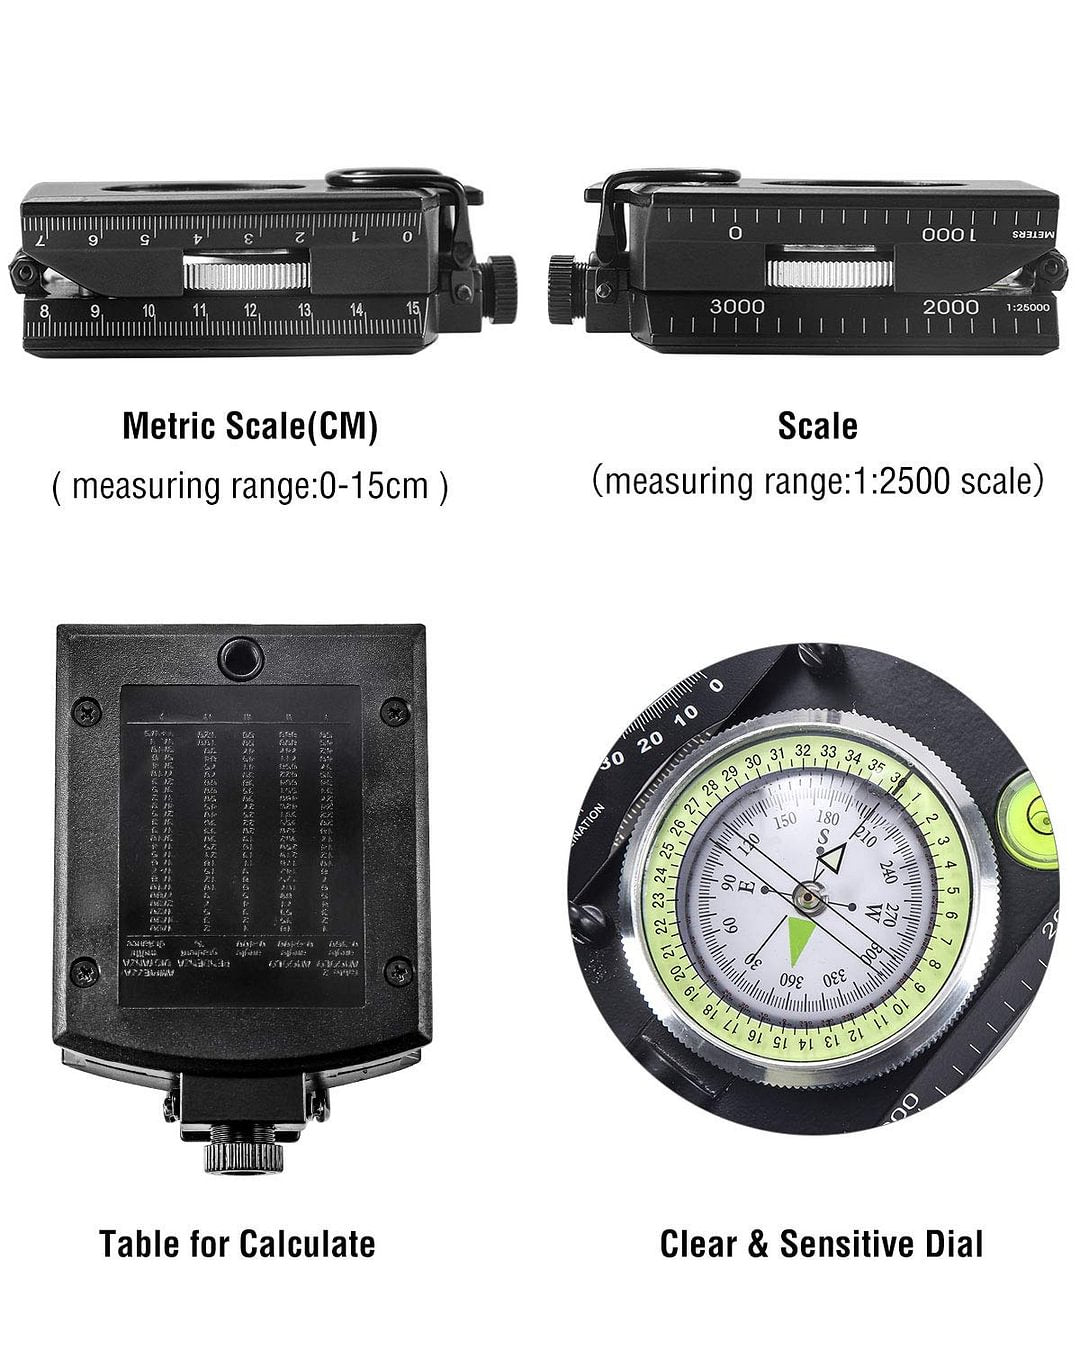 Multifunctional Military Aiming Navigation Compass with Inclinometer | Shock Resistant Waterproof Compass for Hiking, Camping